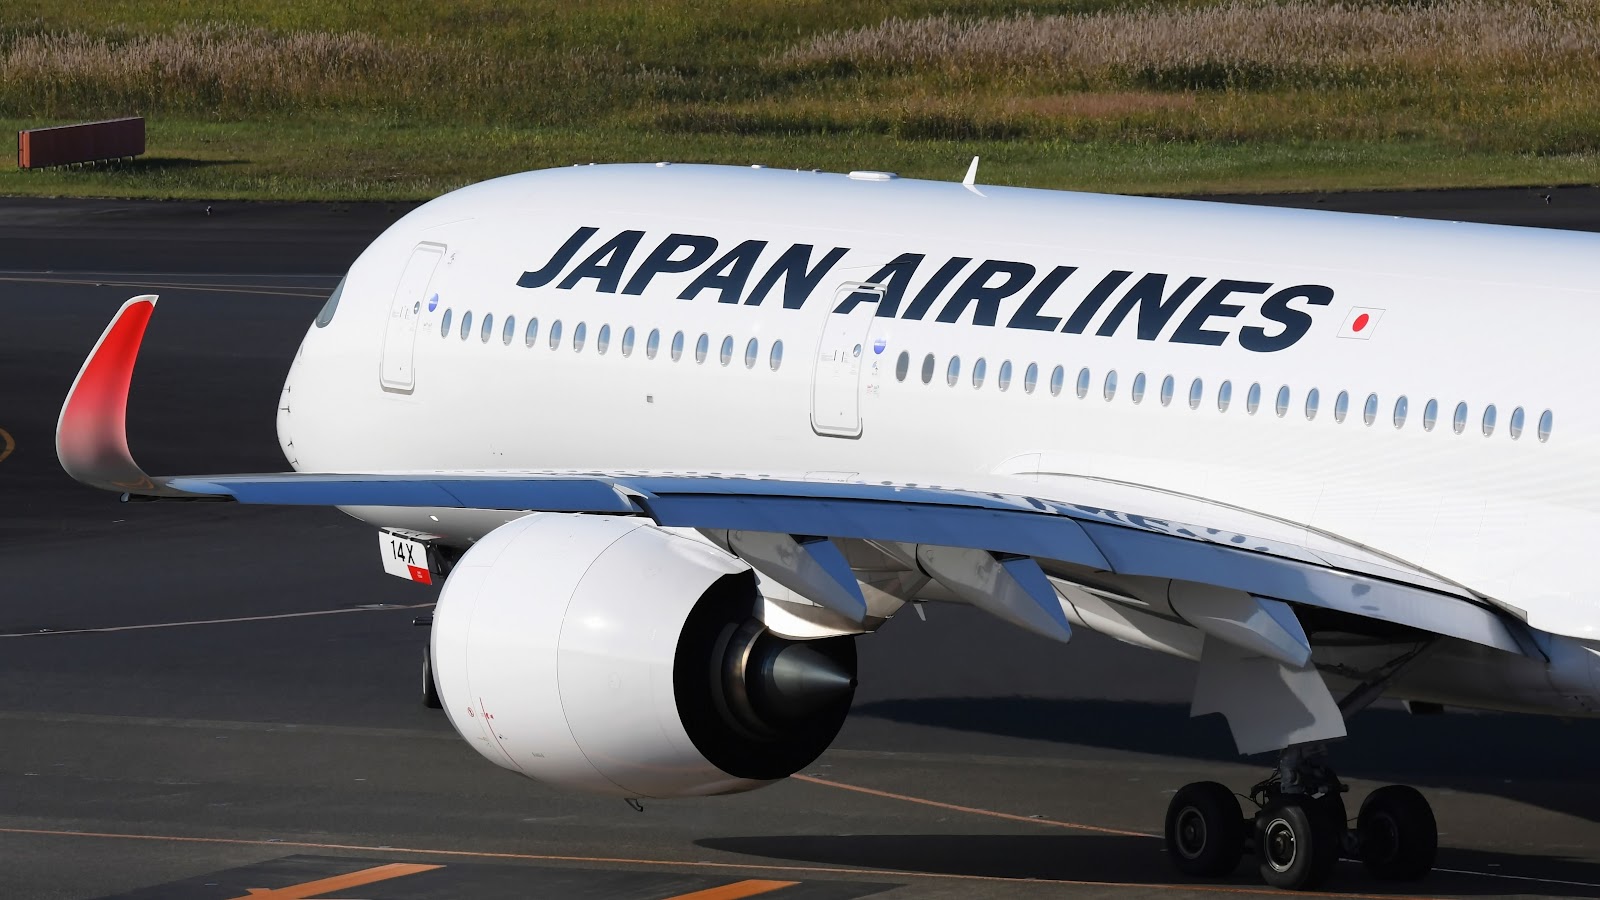 Japan Airlines Airbus A350.